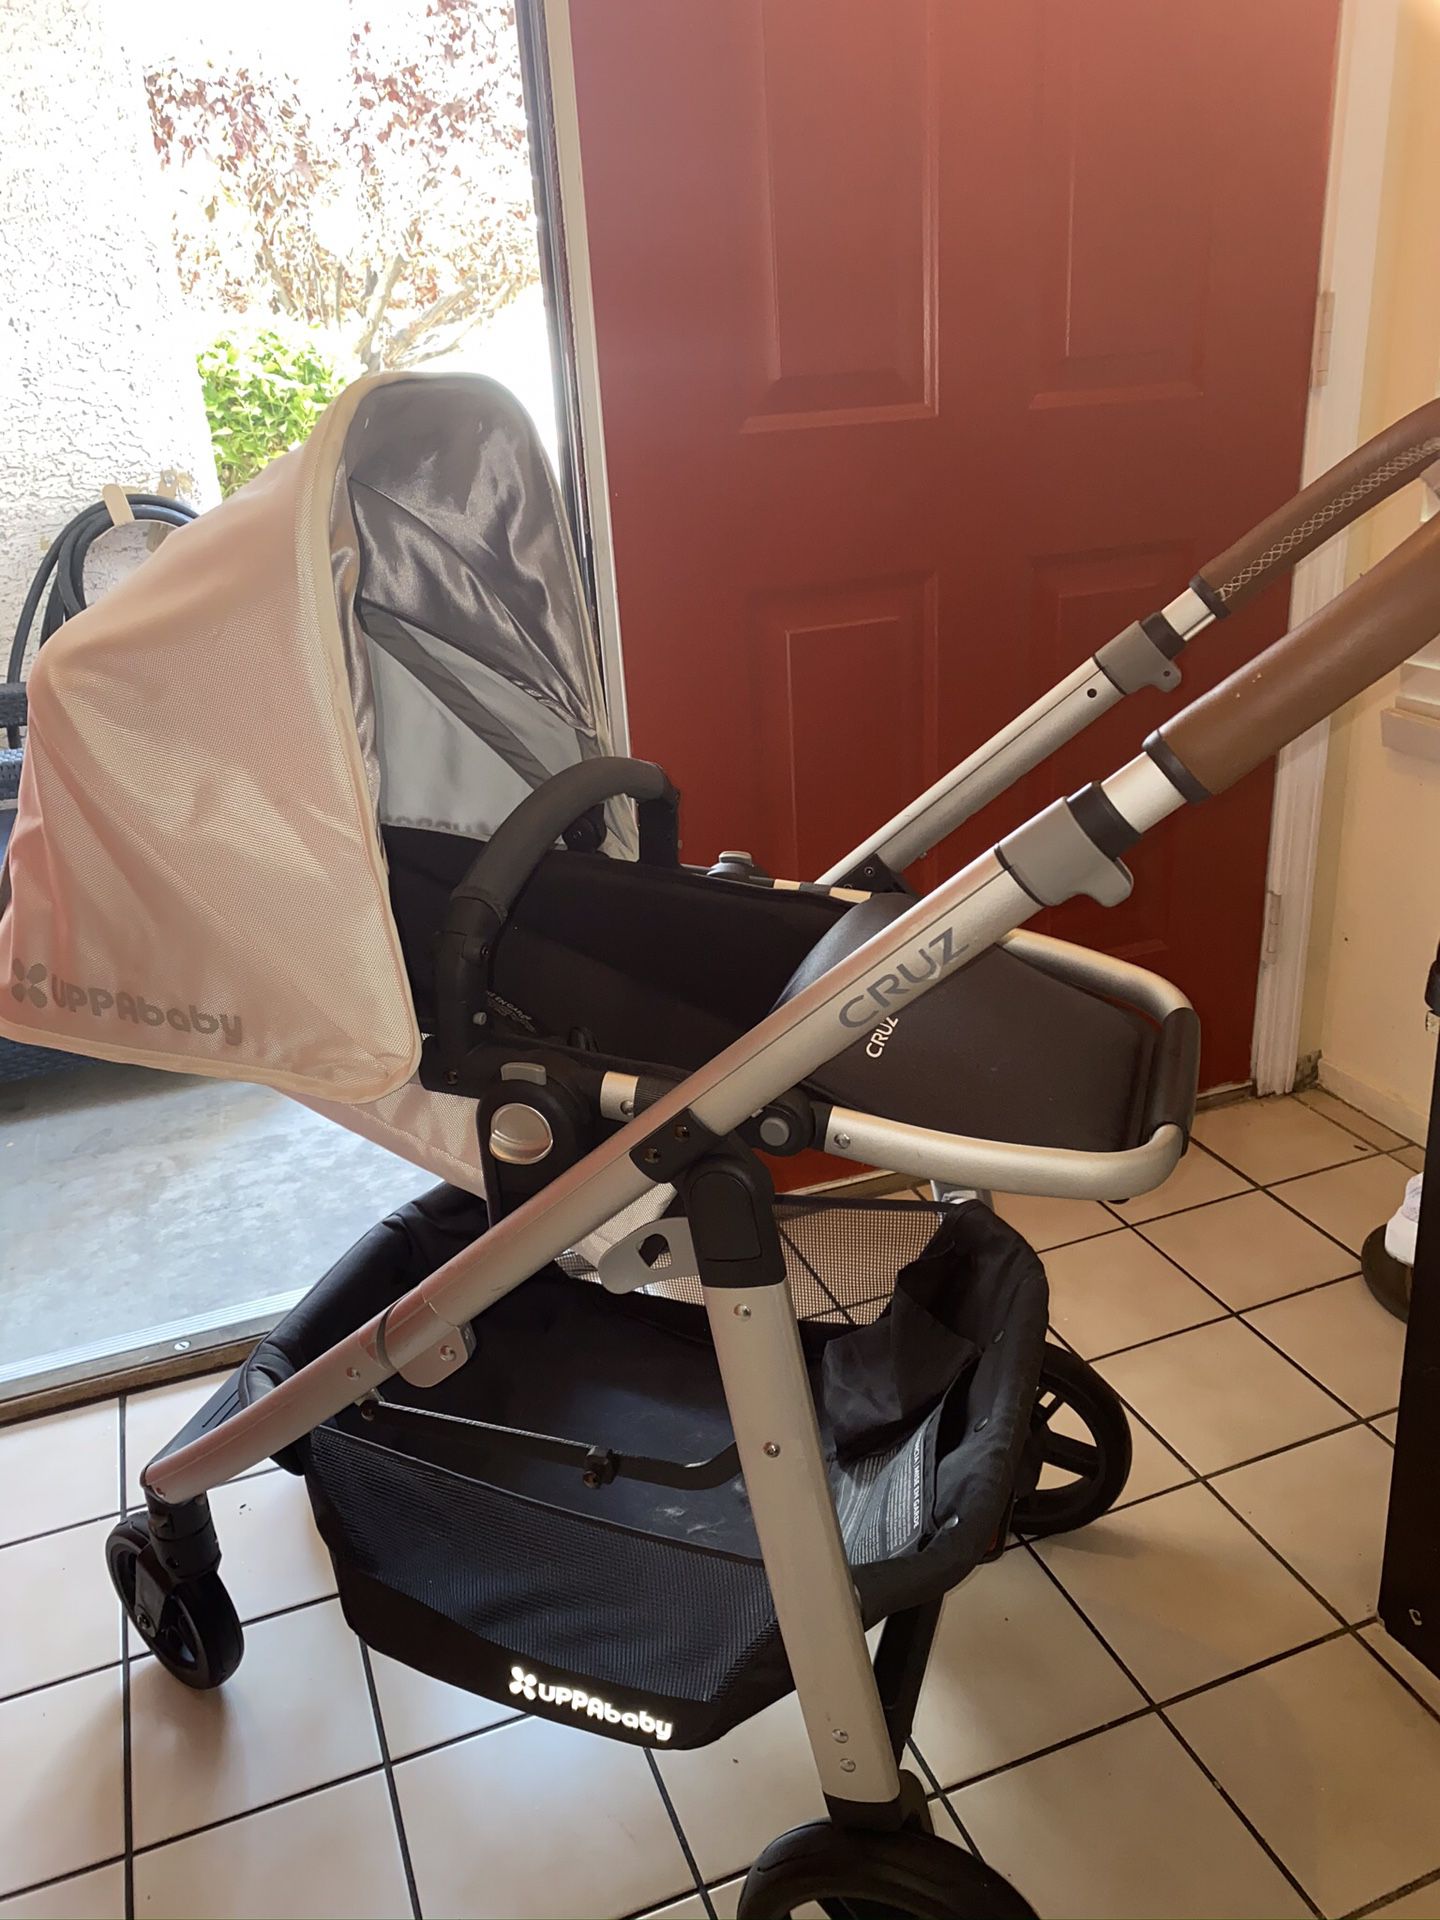 Uppbaby Cruz 2019 baby stroller. New excellent condition open box never used